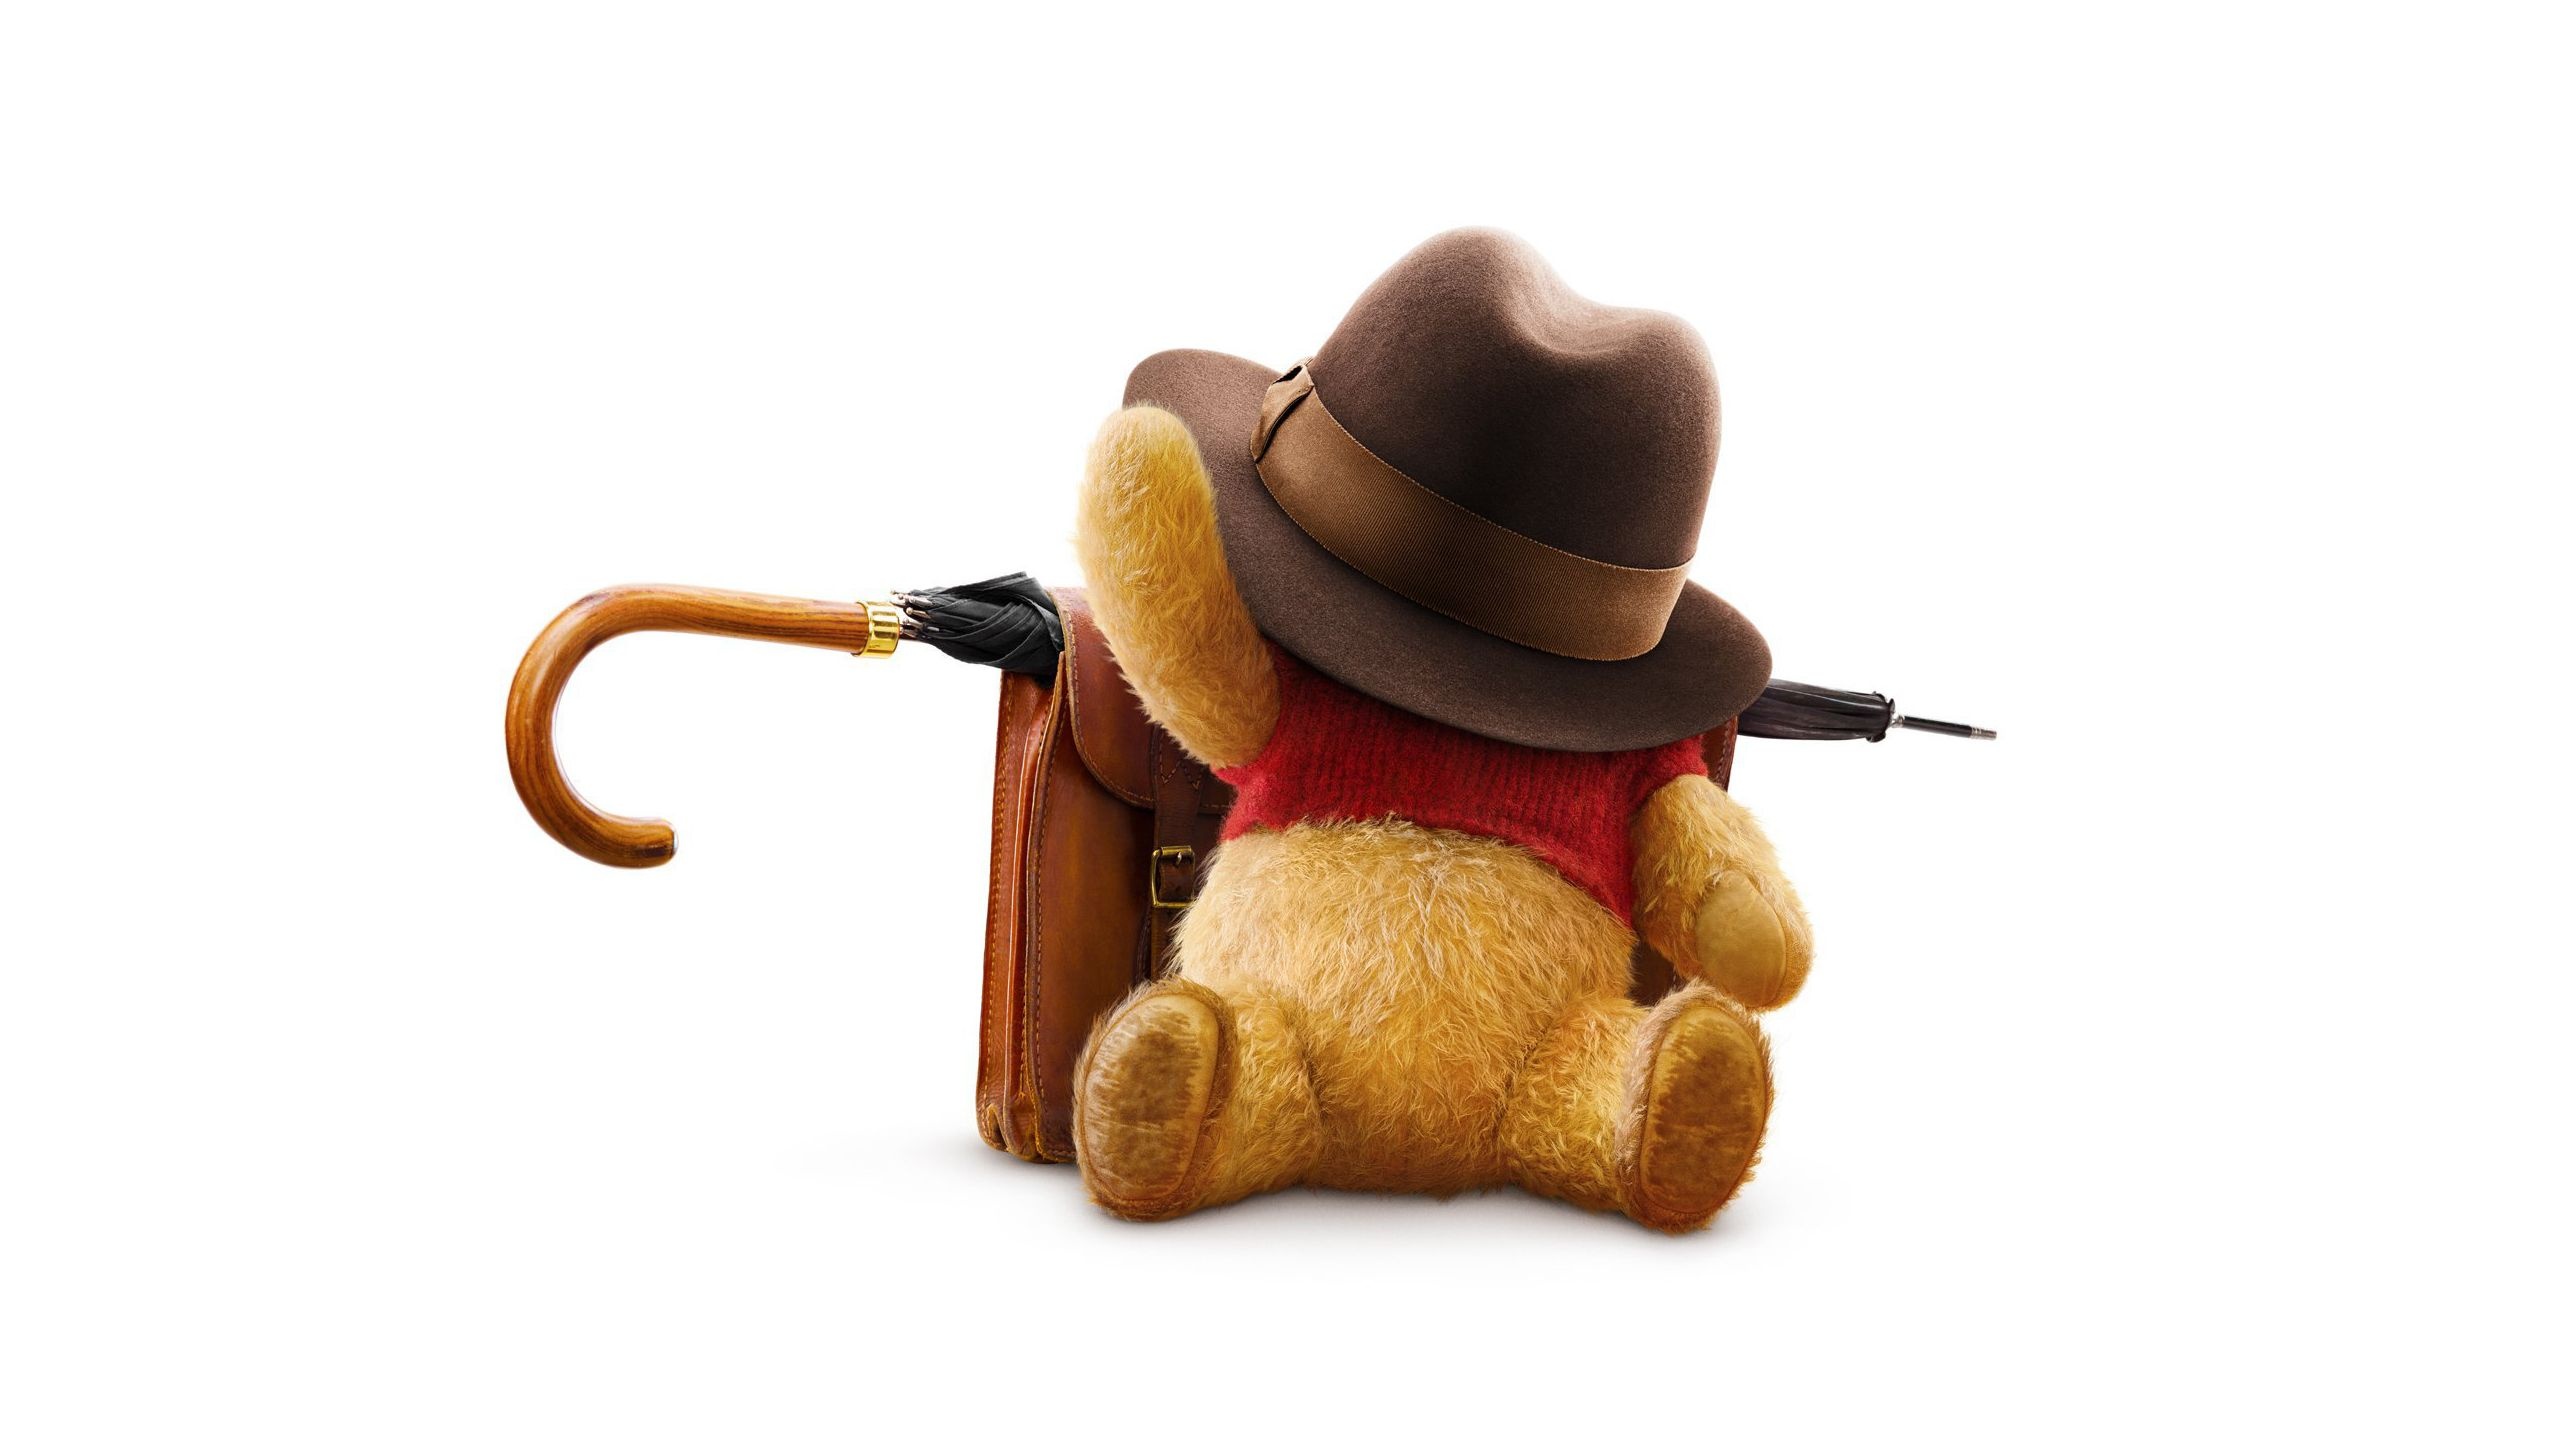 Christopher Robin (Movie): Winnie-the-Pooh, A good-natured, yellow-furred, honey-loving bear. 2560x1440 HD Background.